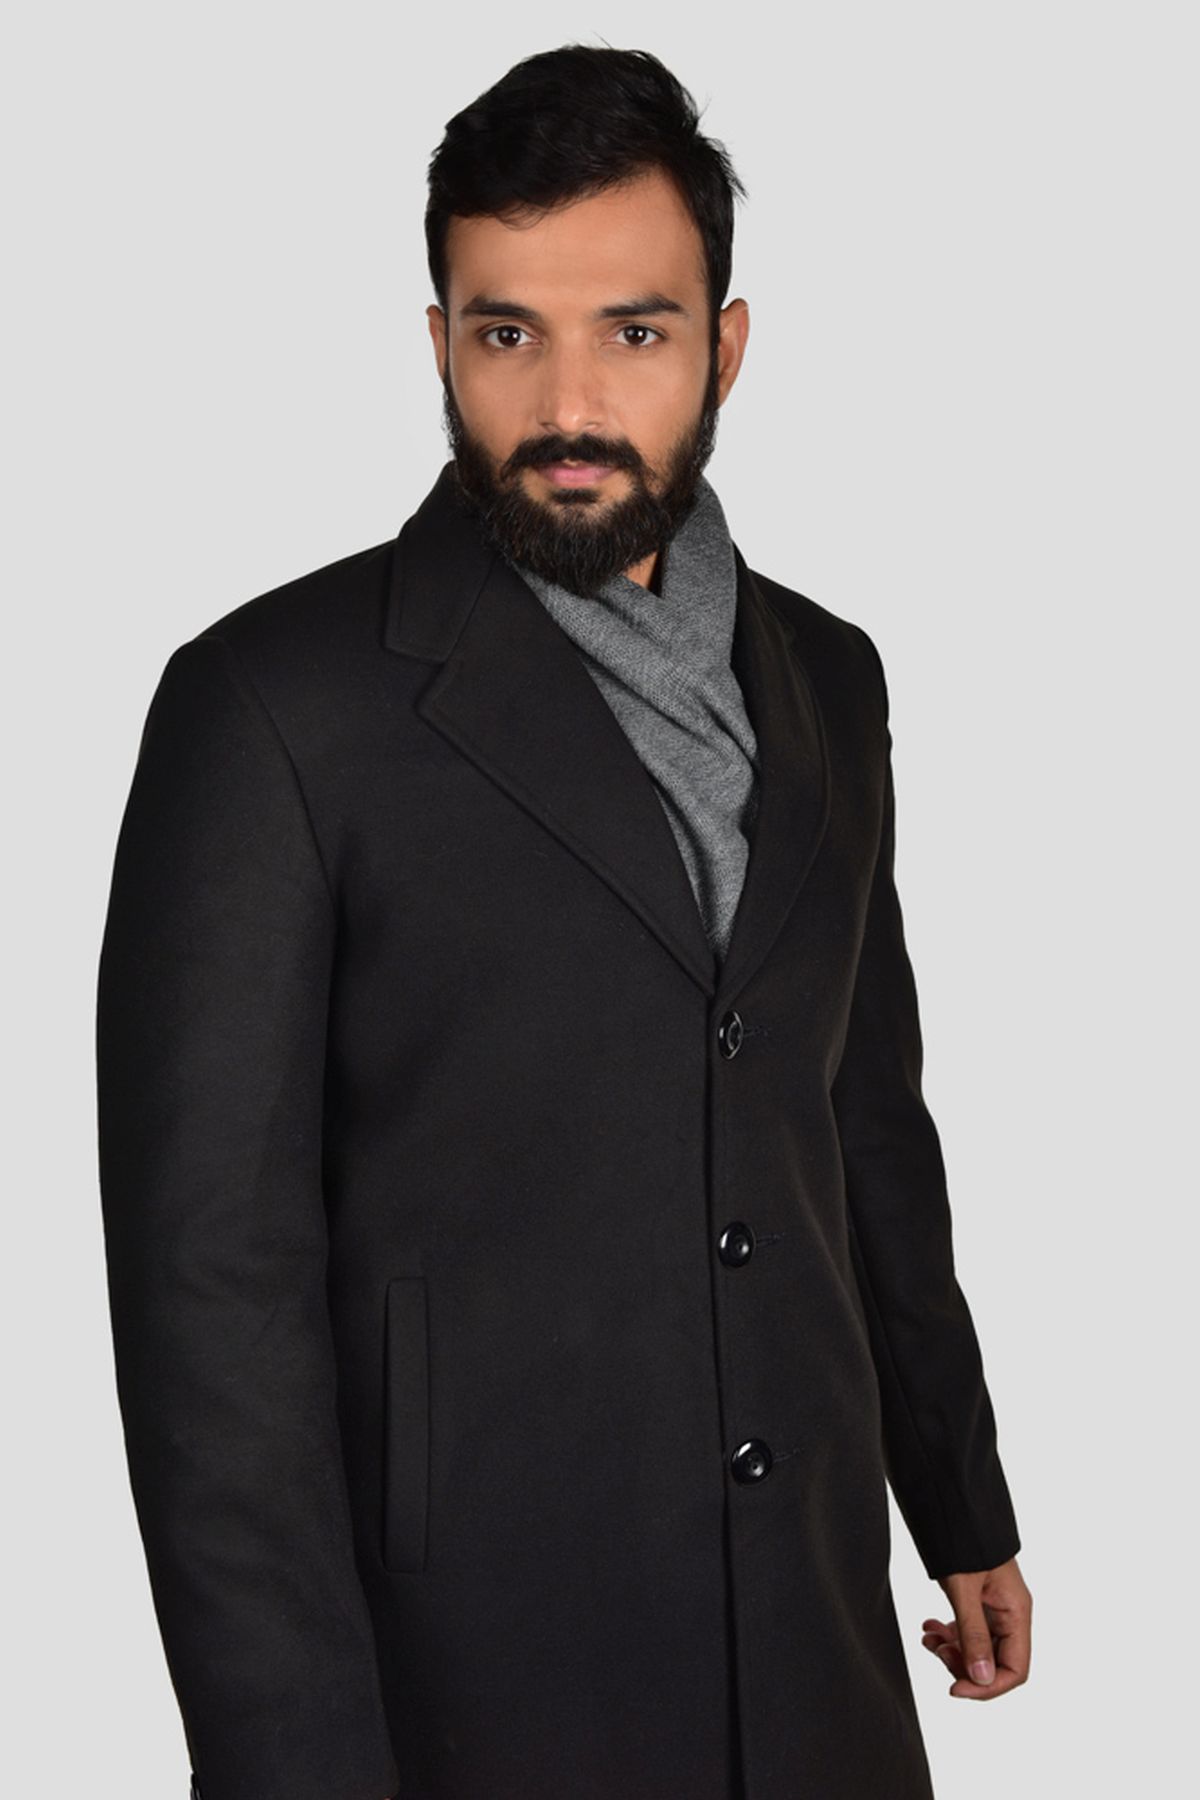 INVACHI Mens Slim Fit Winter Warm Short Woolen Coat Business Jacket with Free Detachable Soft Touch Wool Scarf 